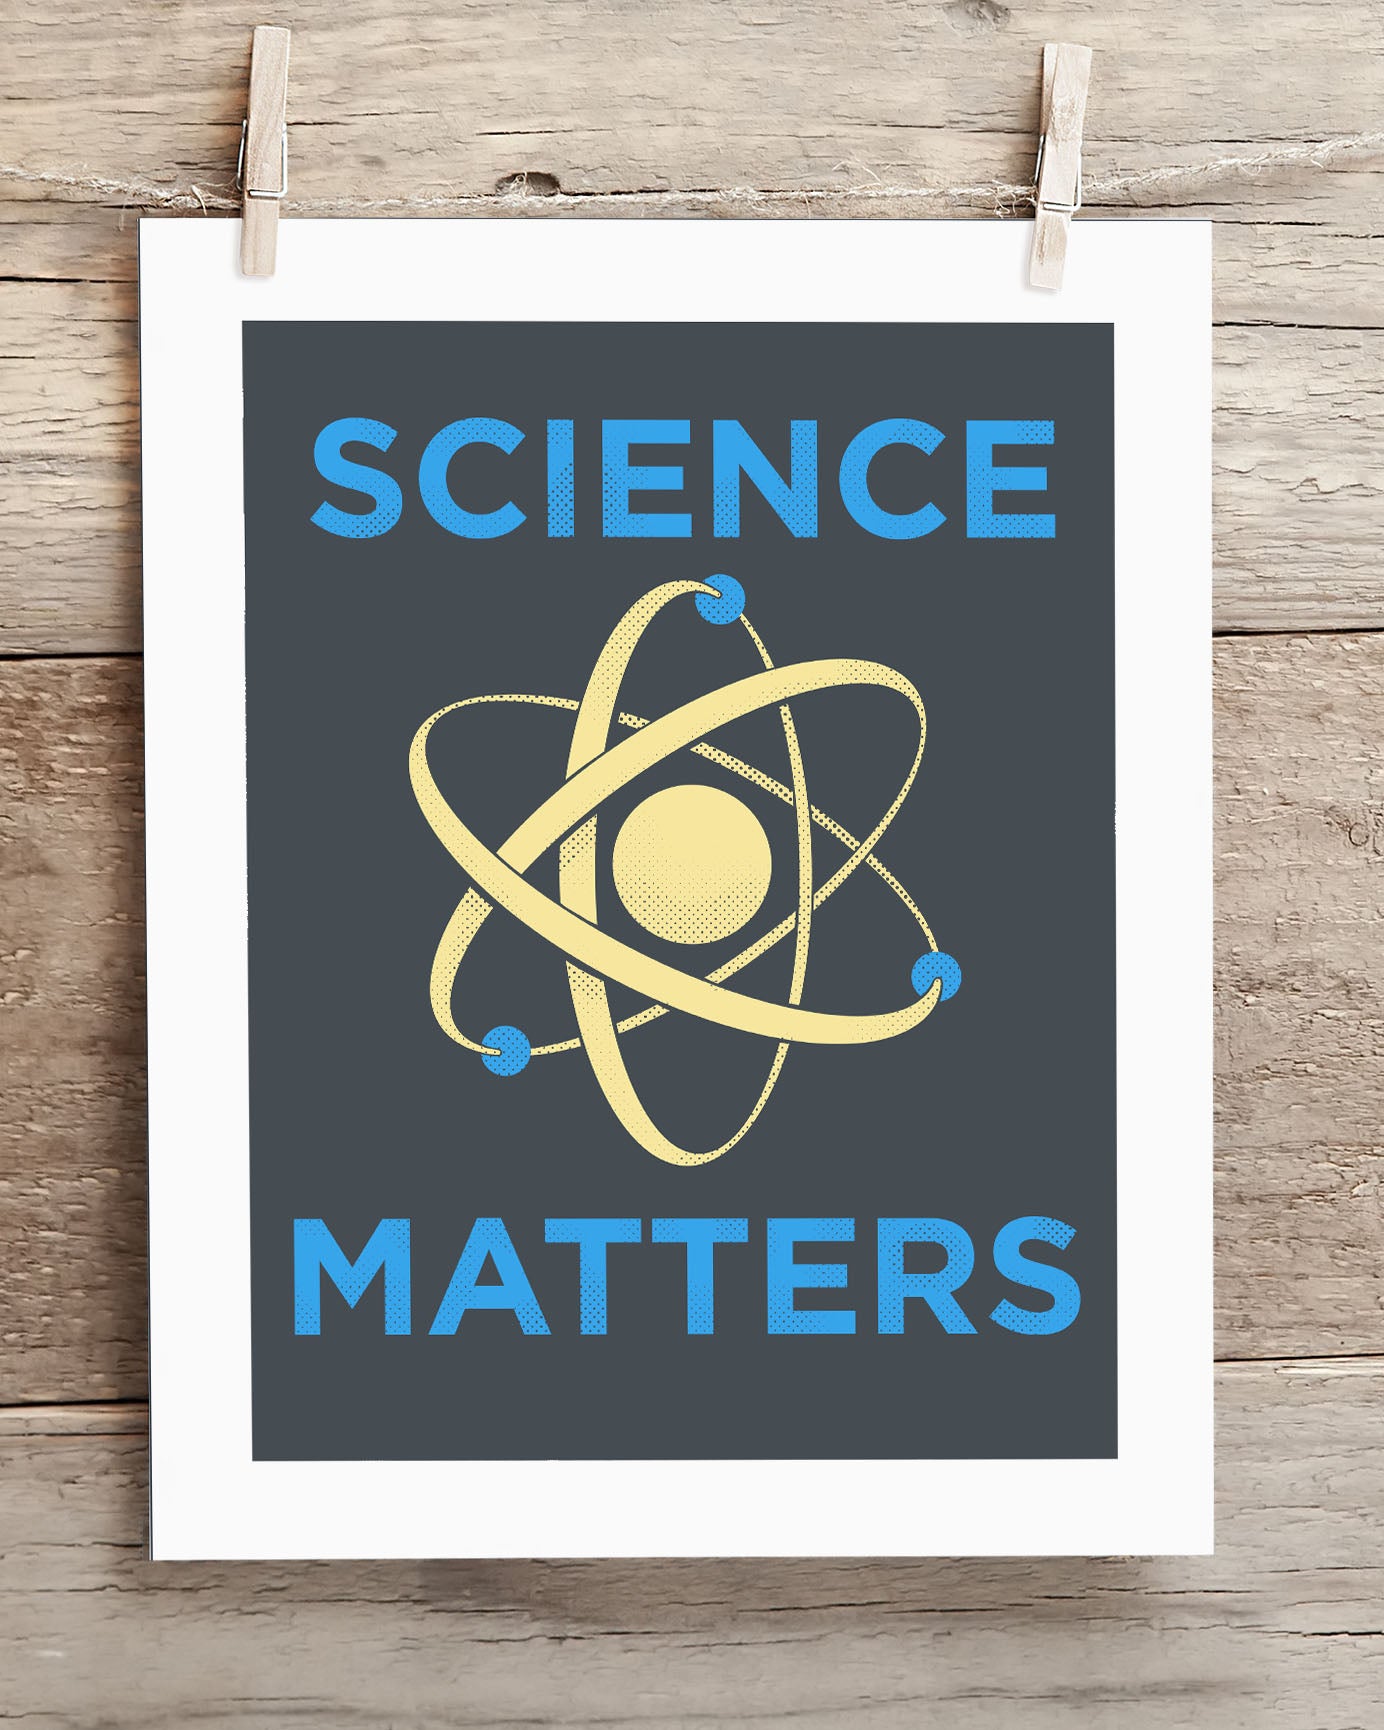 Science Matters Museum Print - Science Matters Museum Print - Science Matters Museum Print - Science Matters Museum Print - Science Matters Museum Print - Science Matters PosterMeterPrint -,